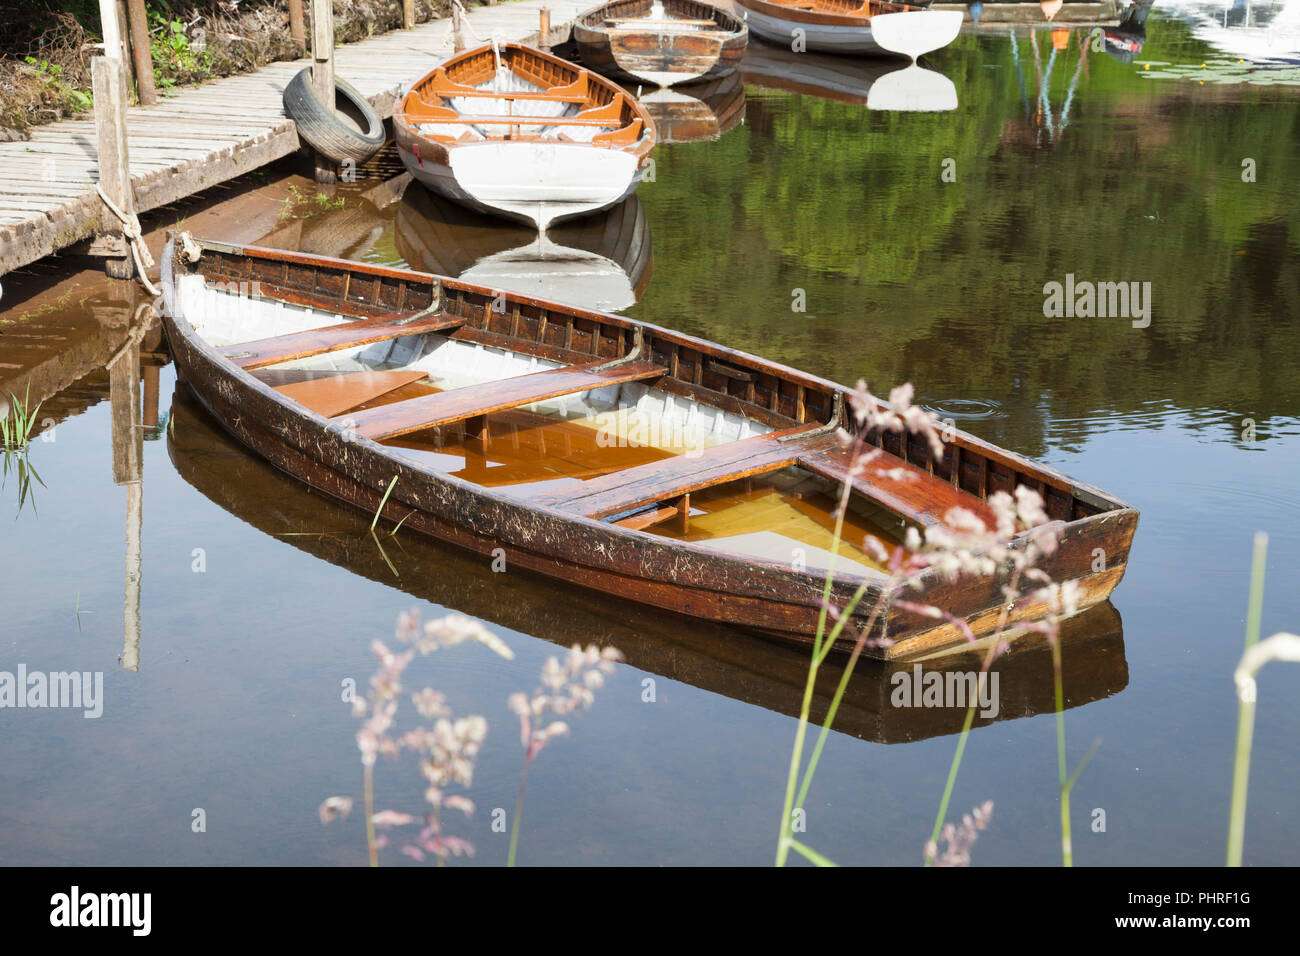 Waterlogged rowing boat at Balmaha, Loch Lomond Scotland, tied to jetty with reflections. Stock Photo